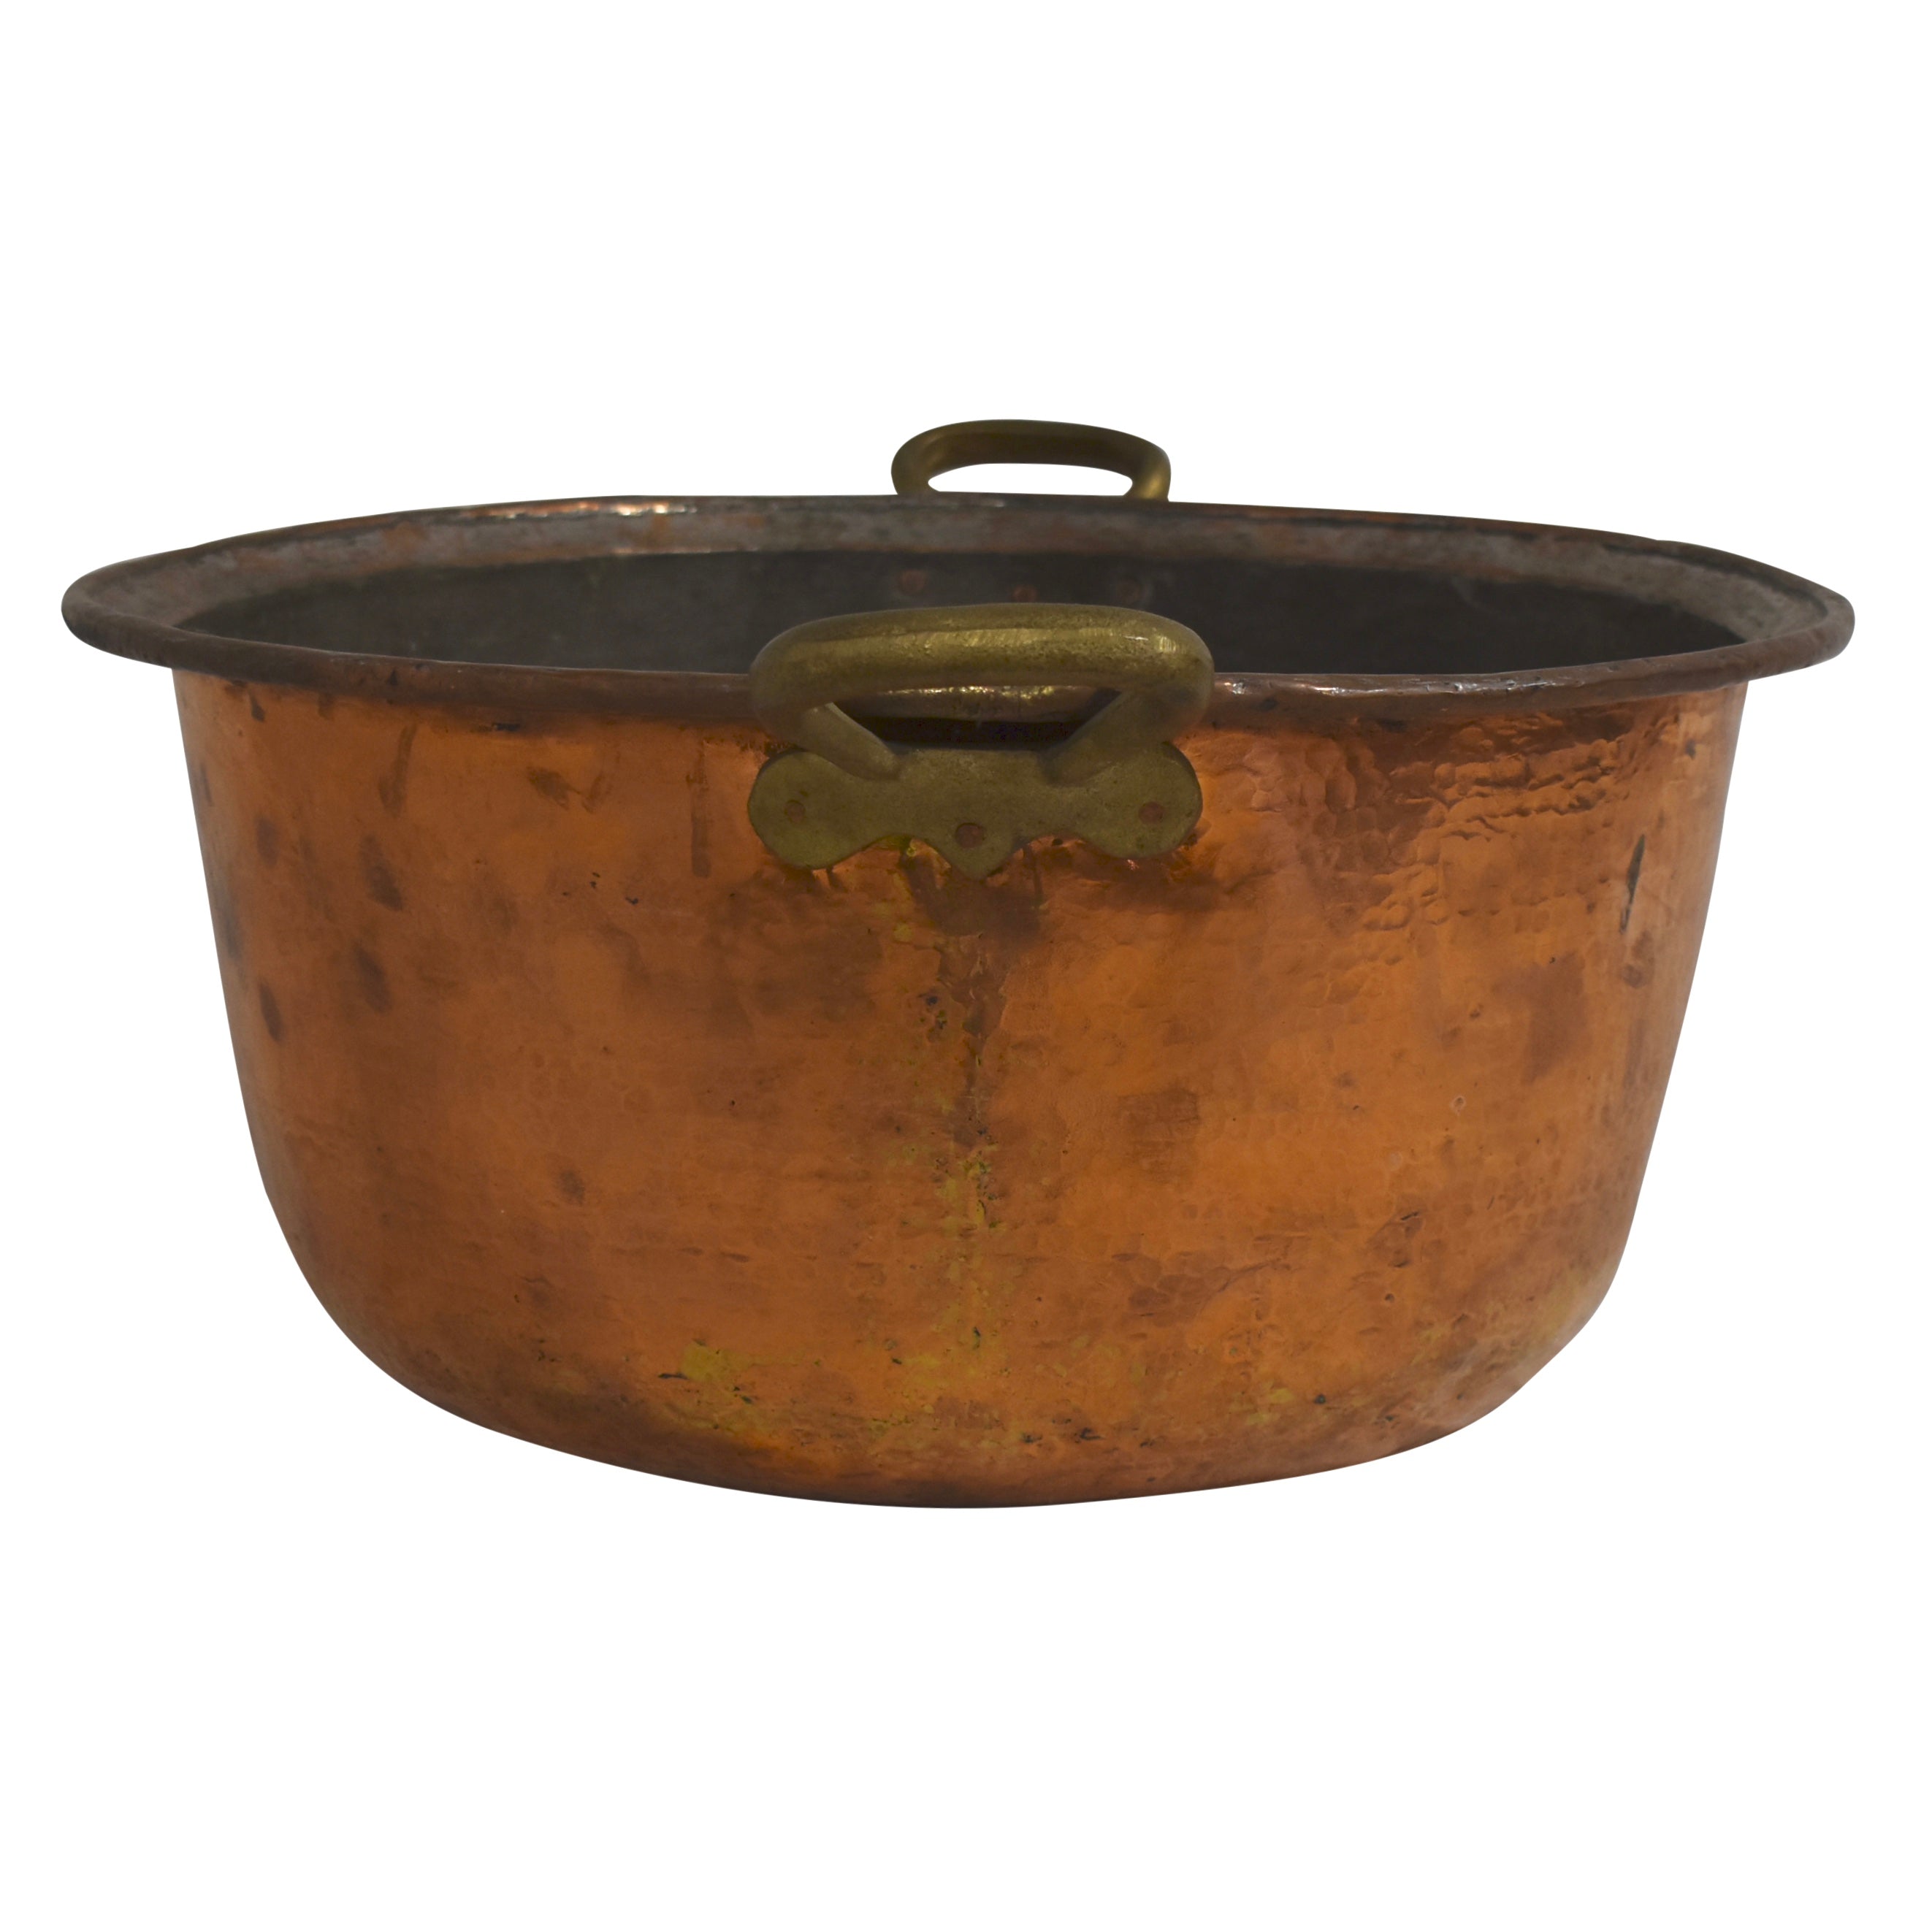 Copper Pot with Brass Handles